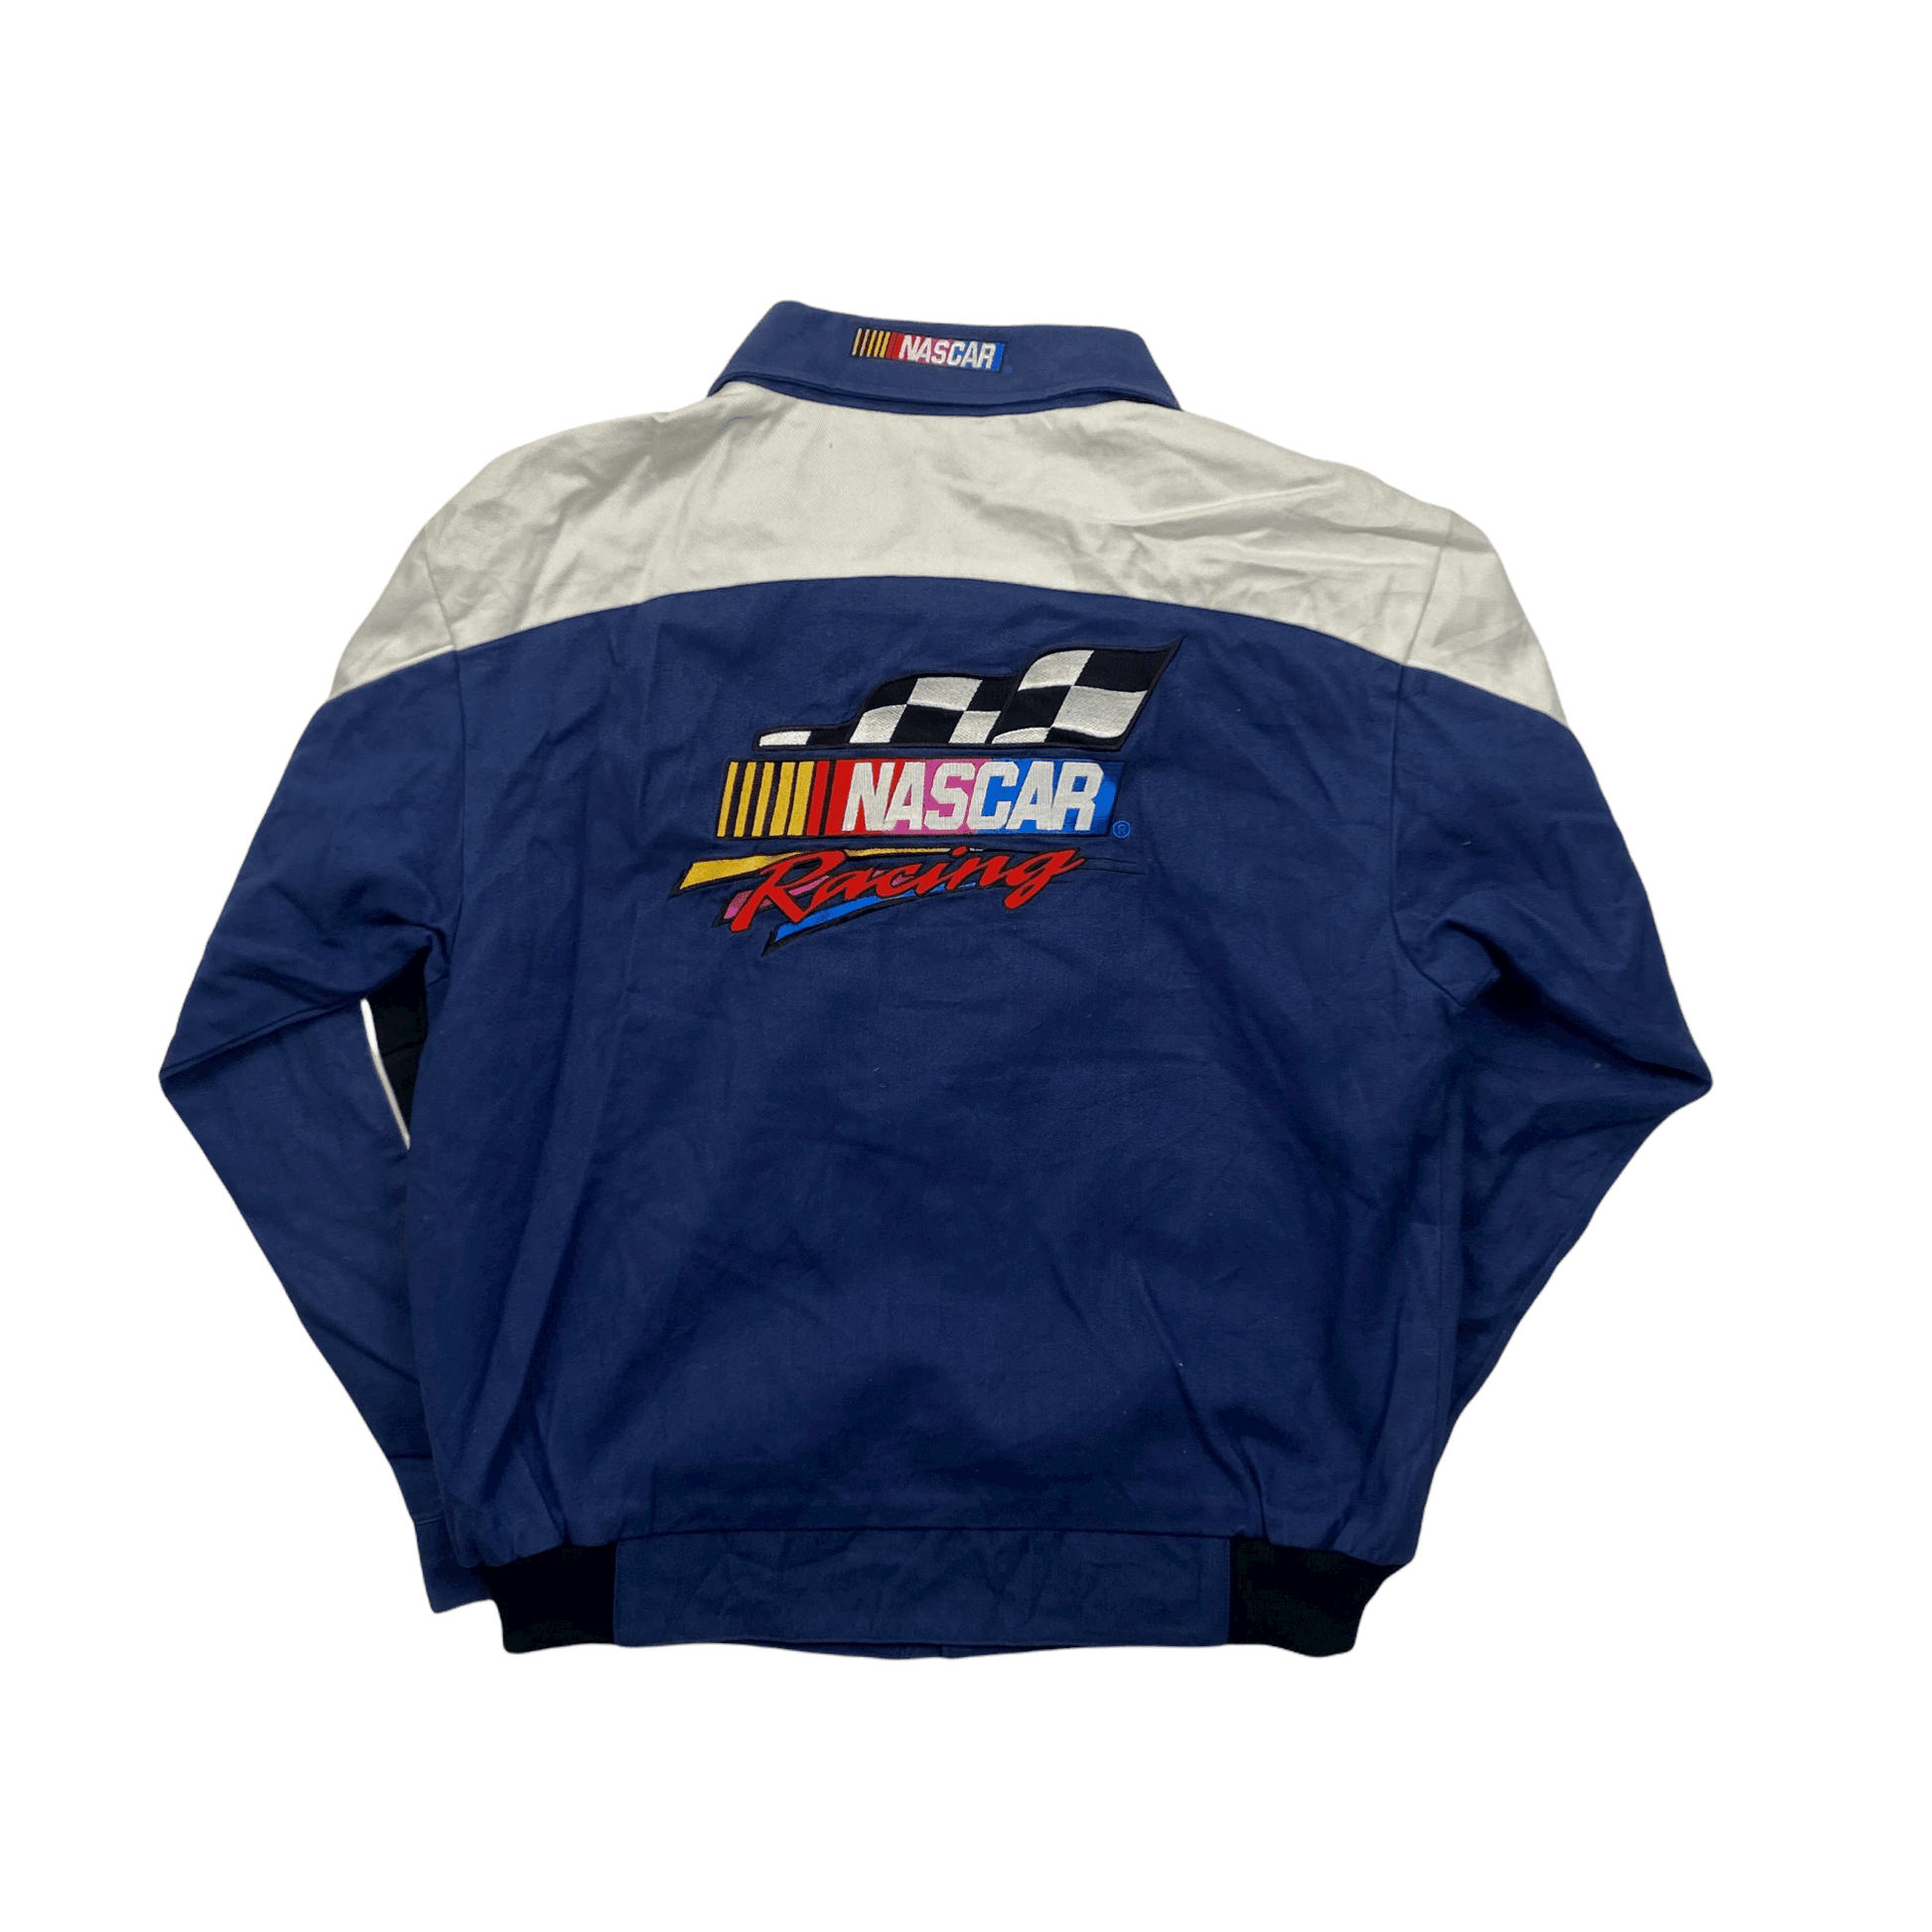 BNWT Vintage 90s Blue + White NASCAR Racing Spell-Out Racing Jacket -